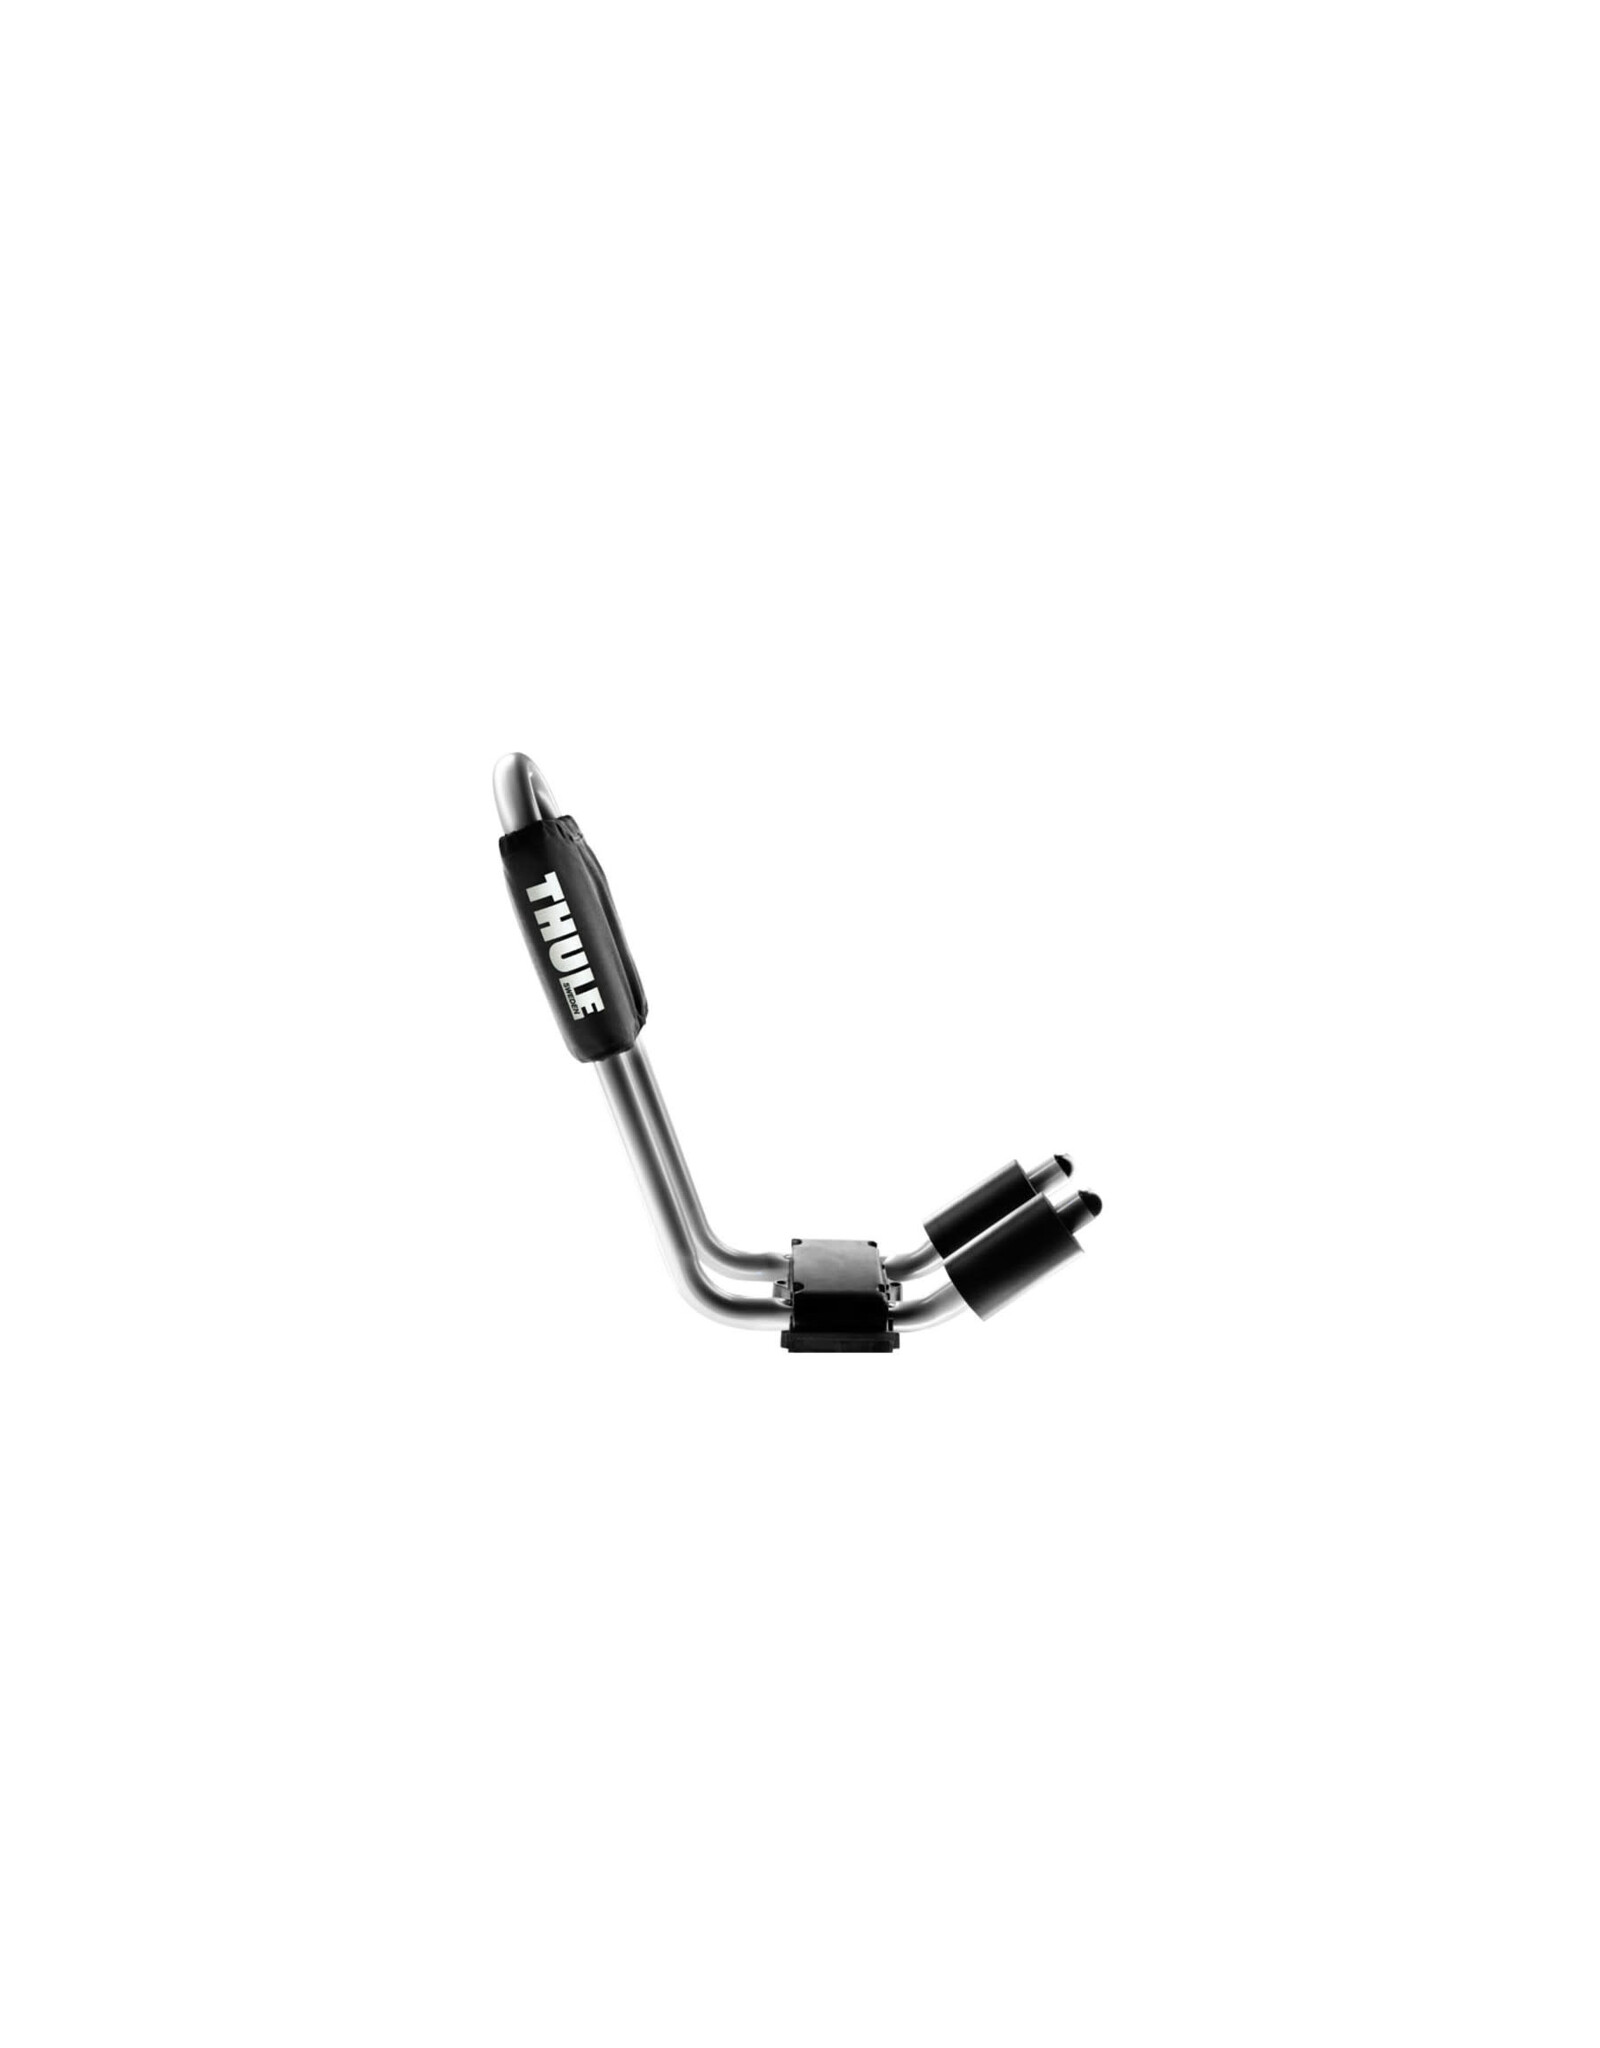 Thule ThuleThule 834 Hull-a-Port J style holder